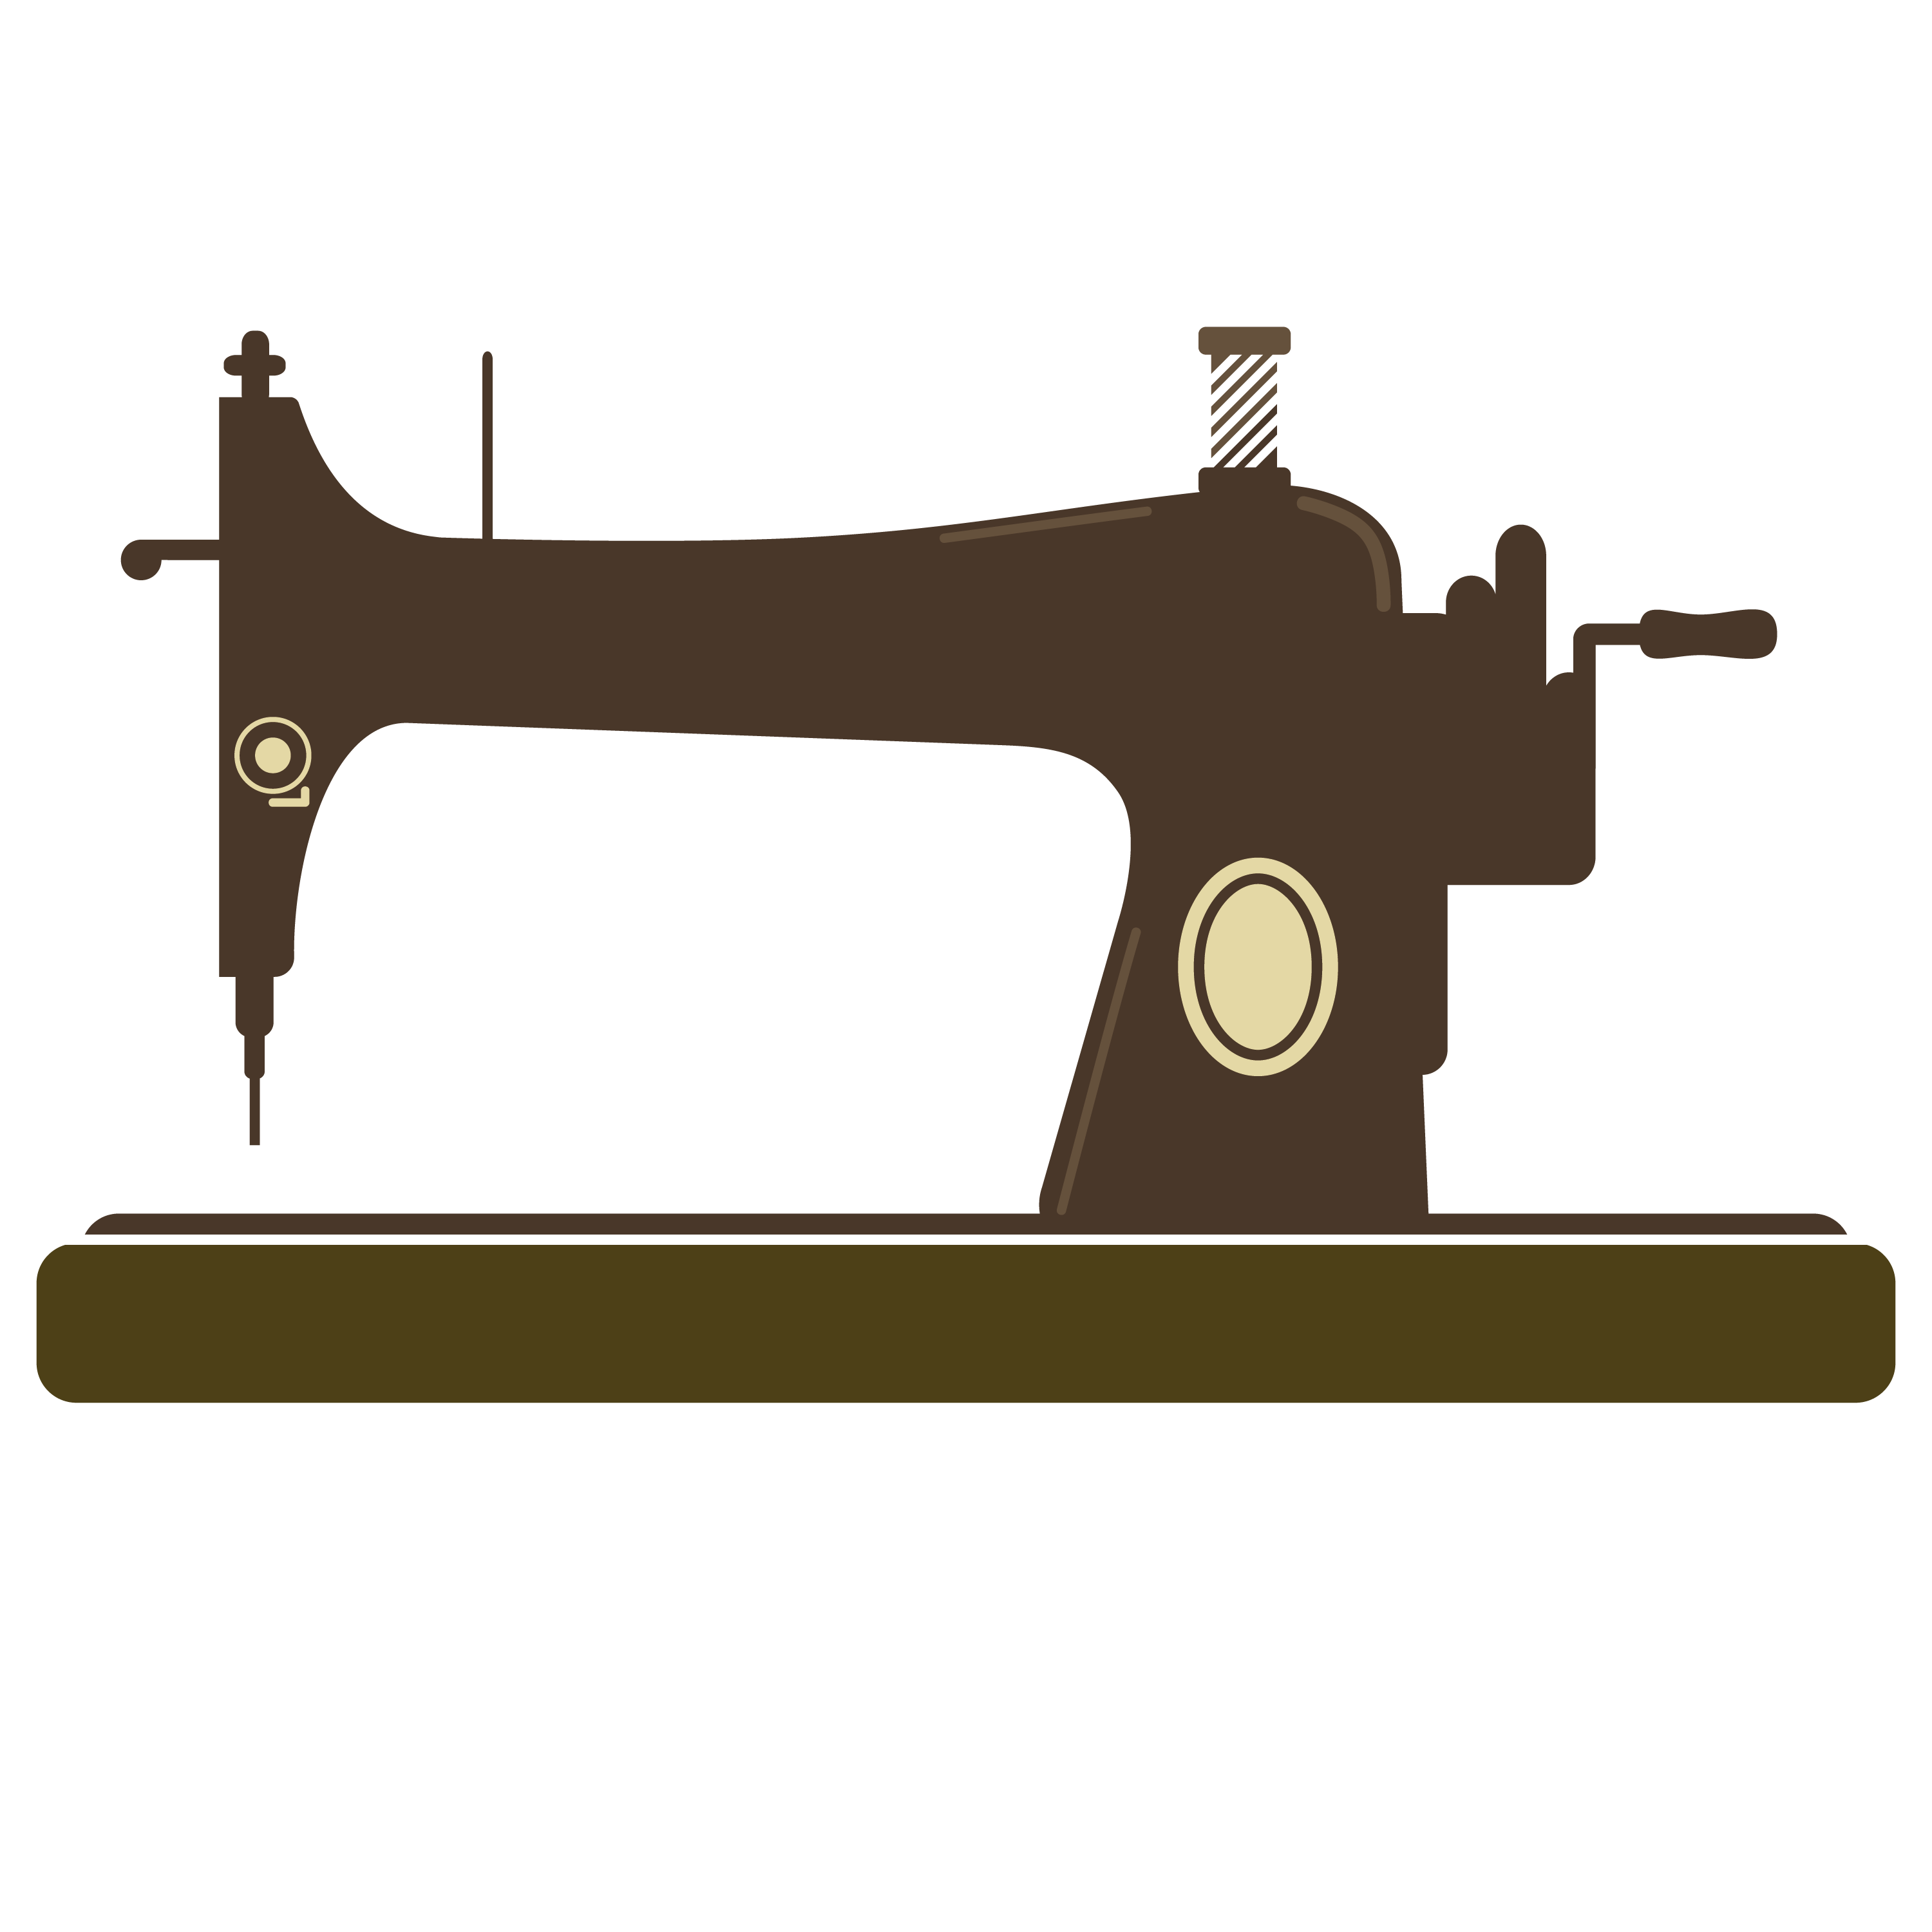 Sewing Machine Clipart - Cliparts.co